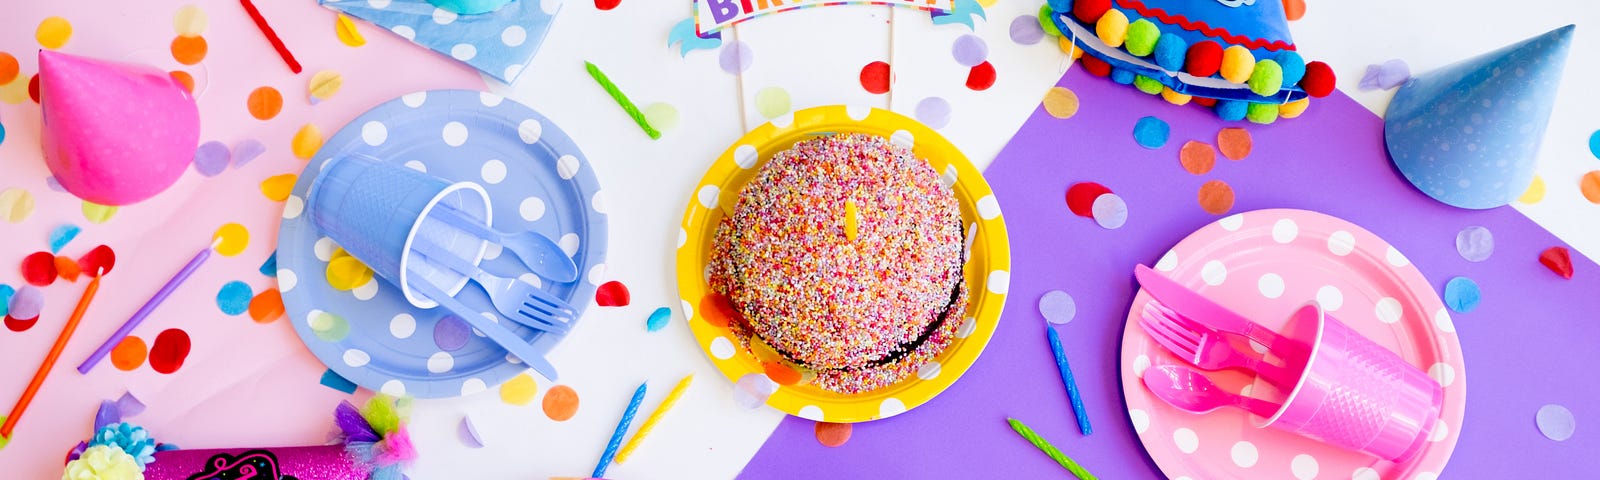 A birthday sign, cake, party hats, and confetti lay across a table